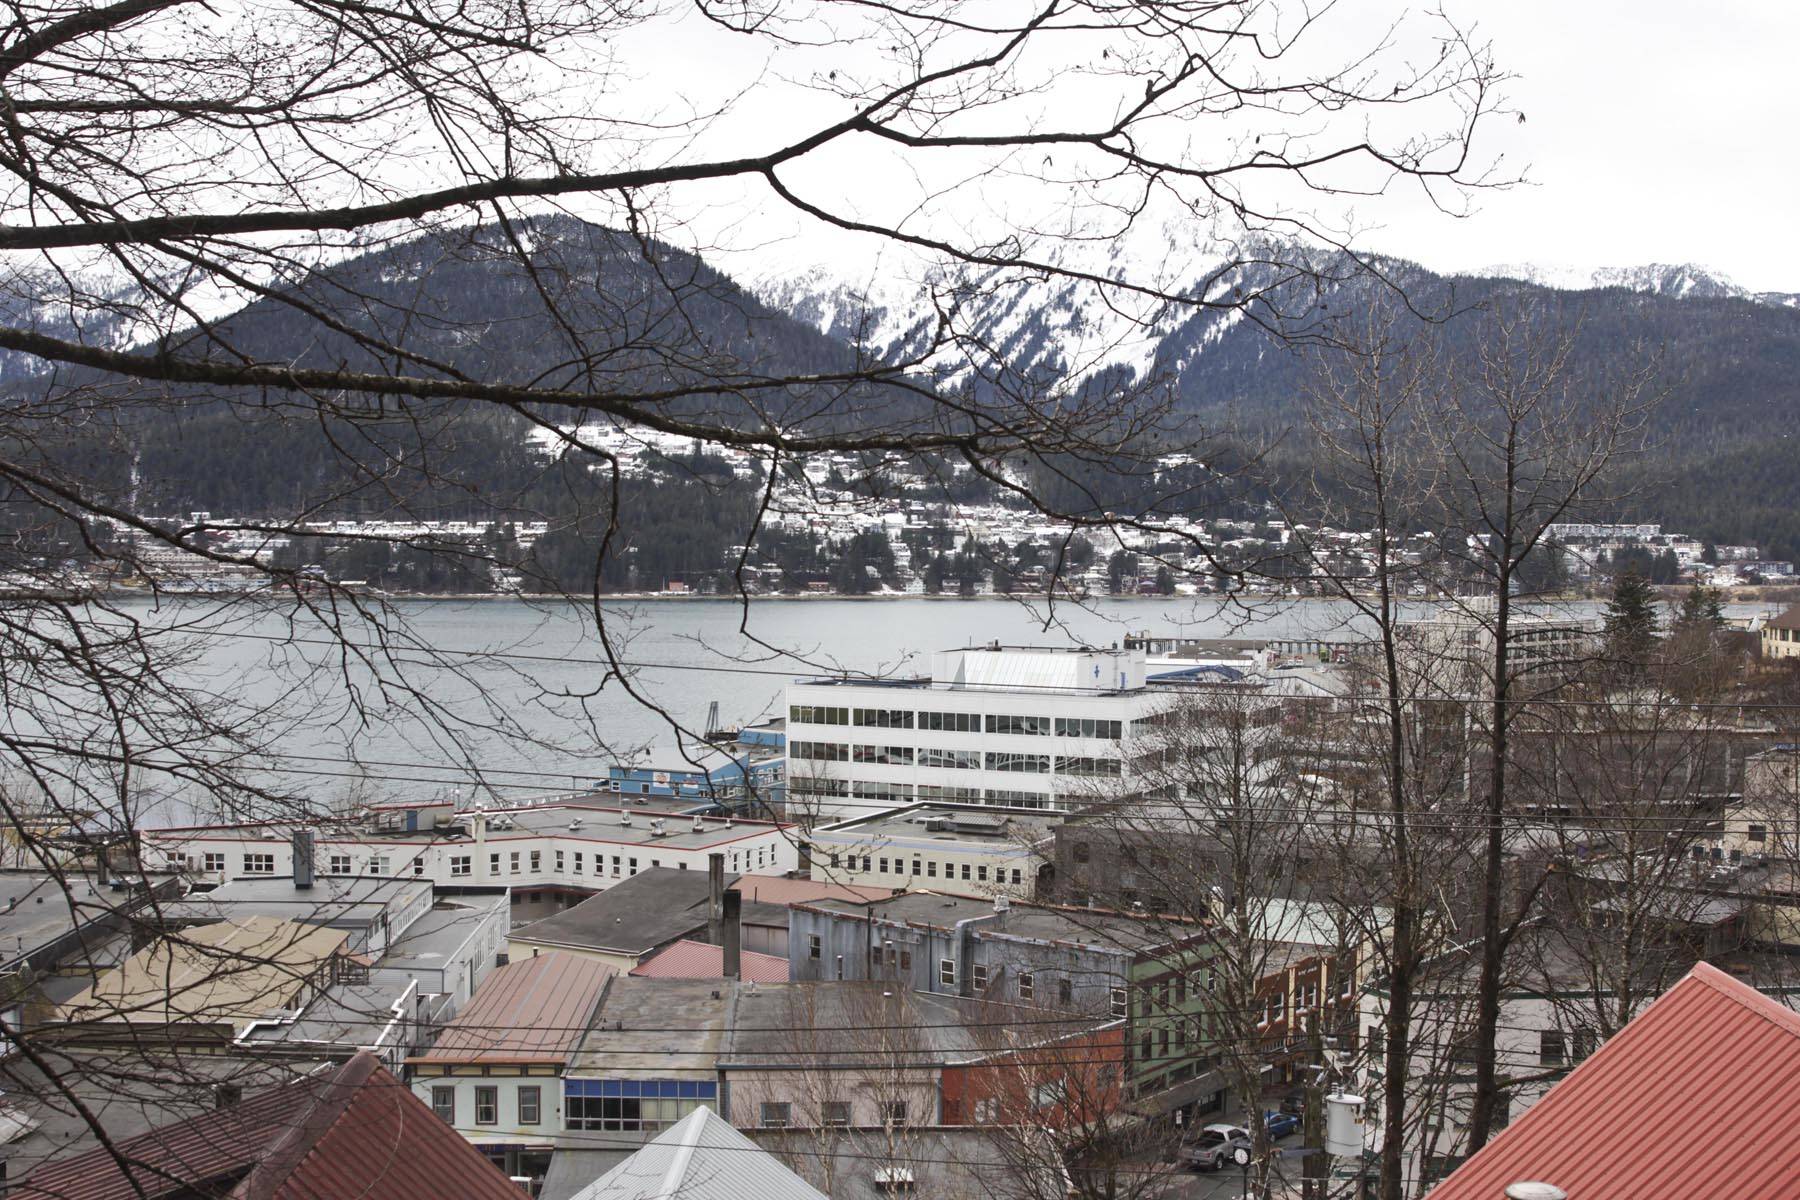 Downtown Juneau is quiet in this March 20, 2020 photo. A City and Borough of Juneau website is tracking changes to businesses caused by COVID-19. (Michael S. Lockett | Juneau Empire)